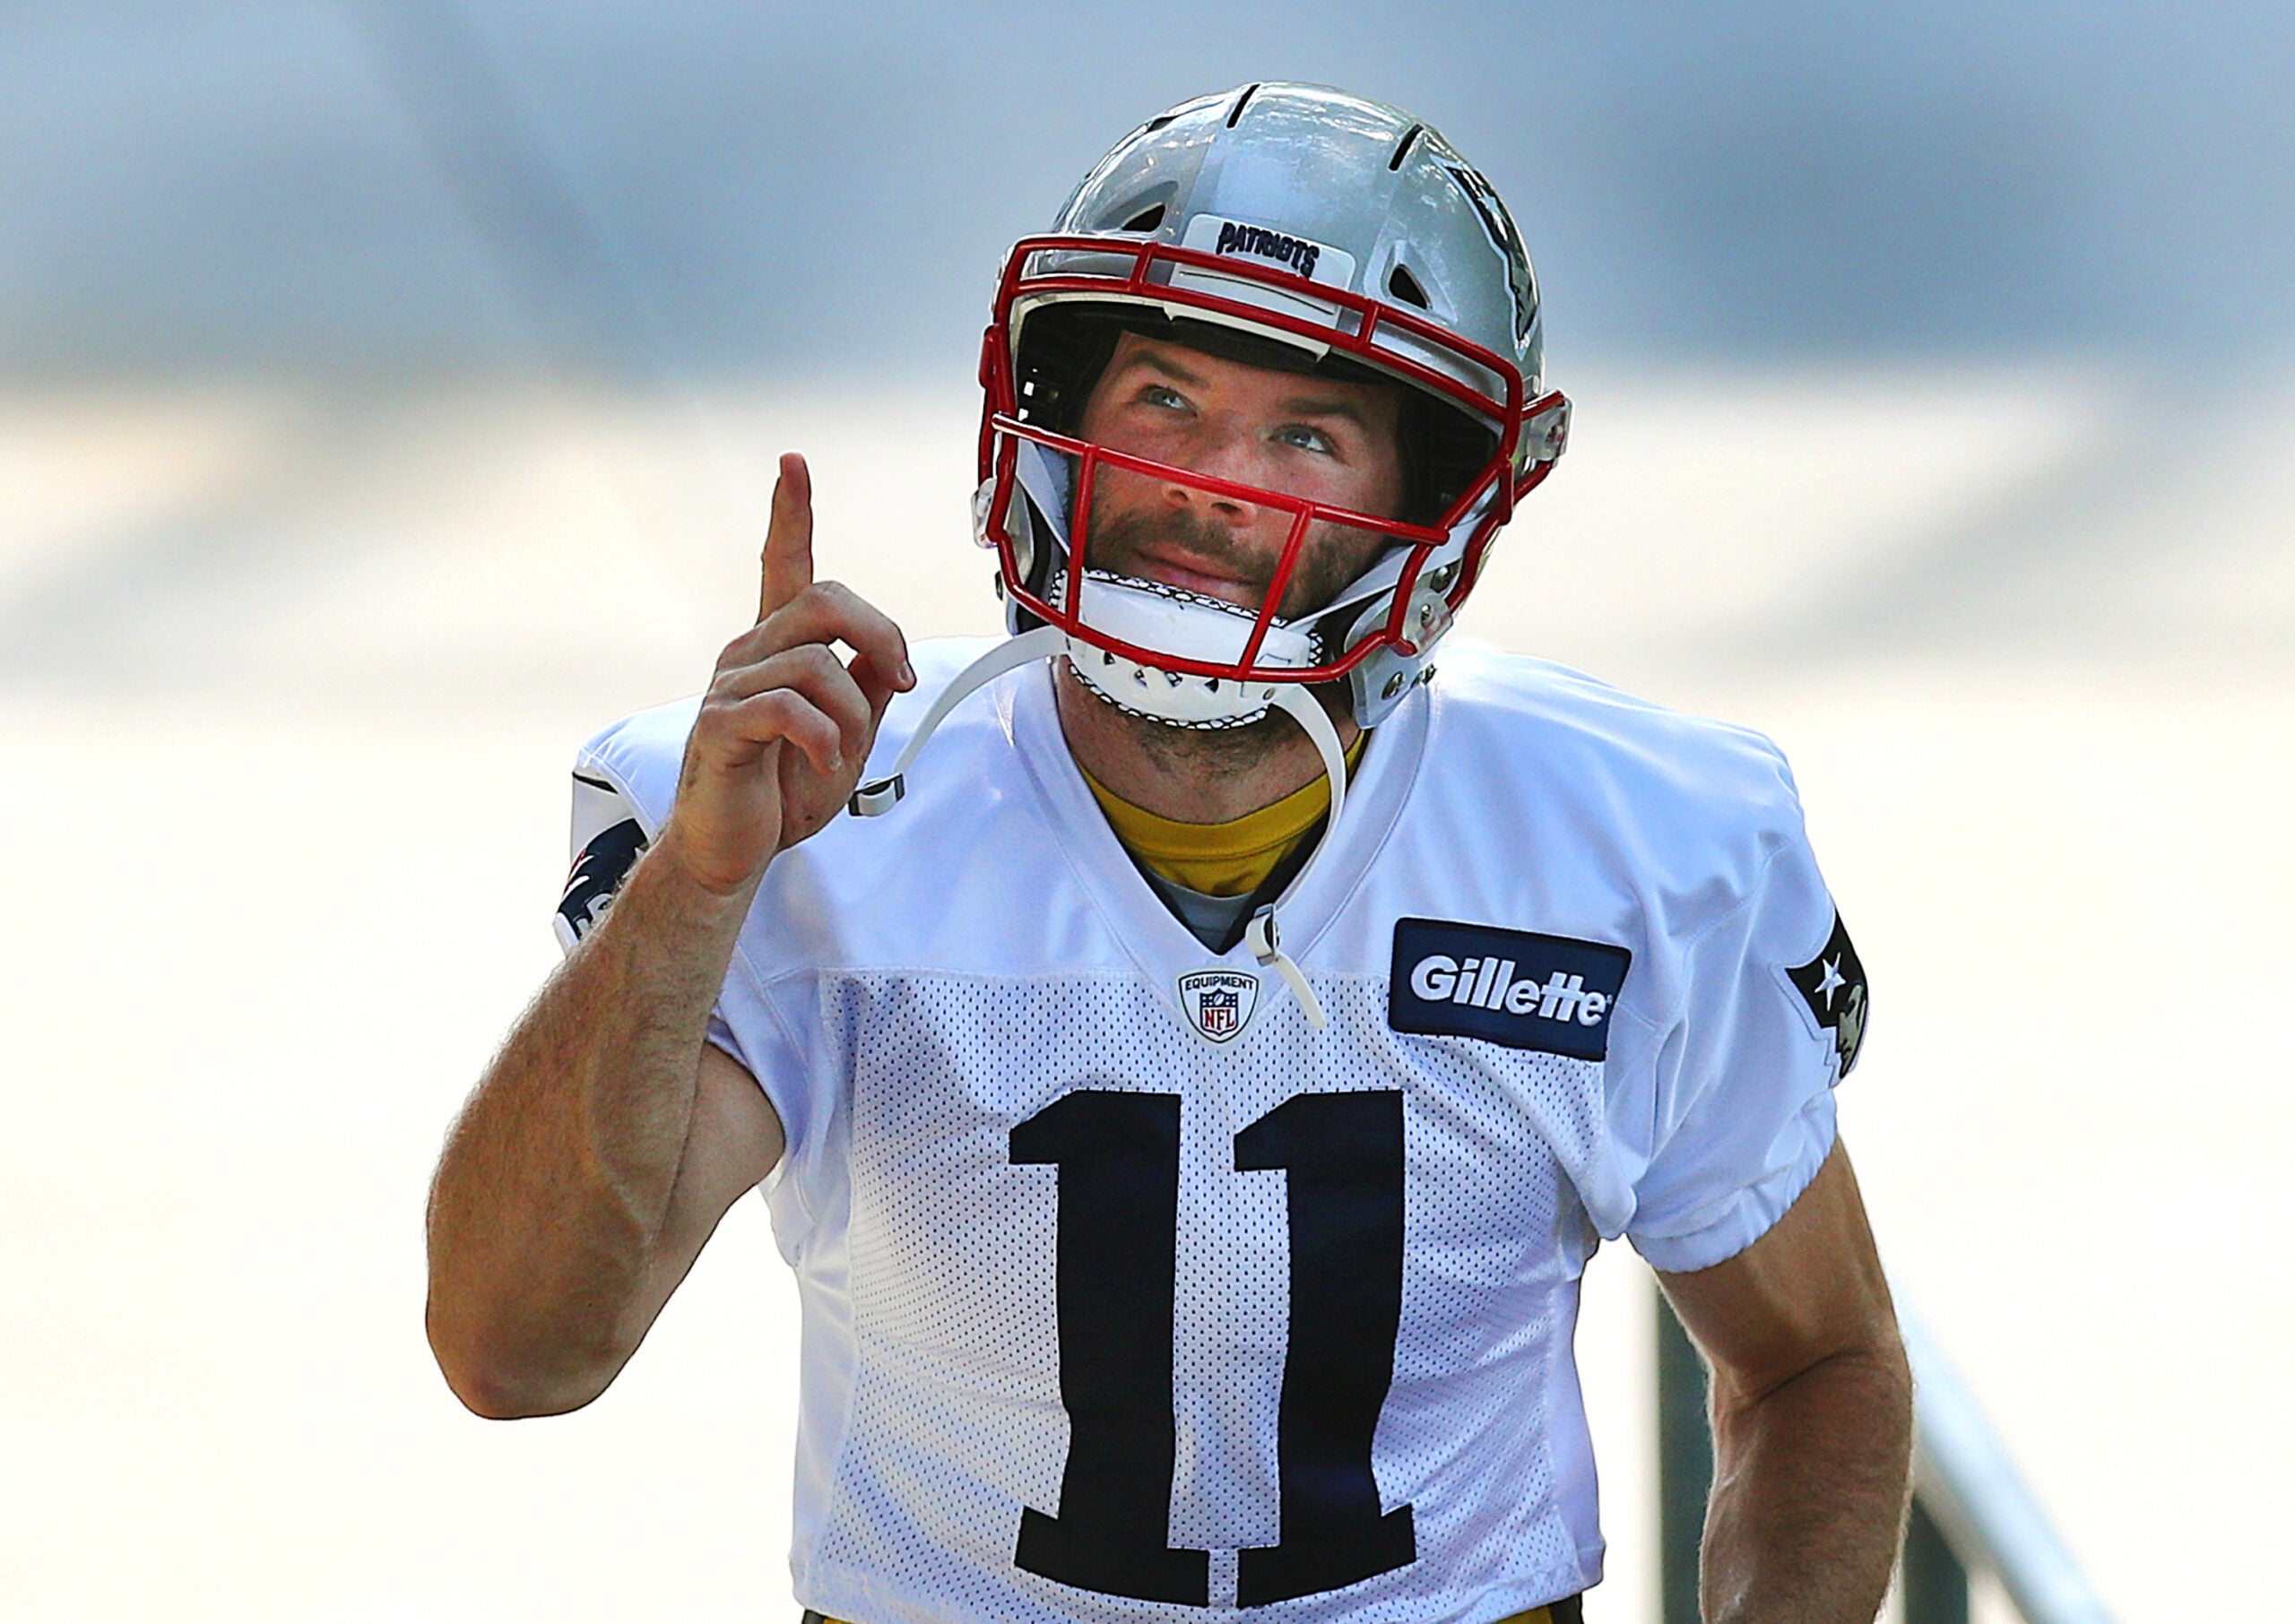 Patriots' Julian Edelman named 4th-best Jewish football player of all time